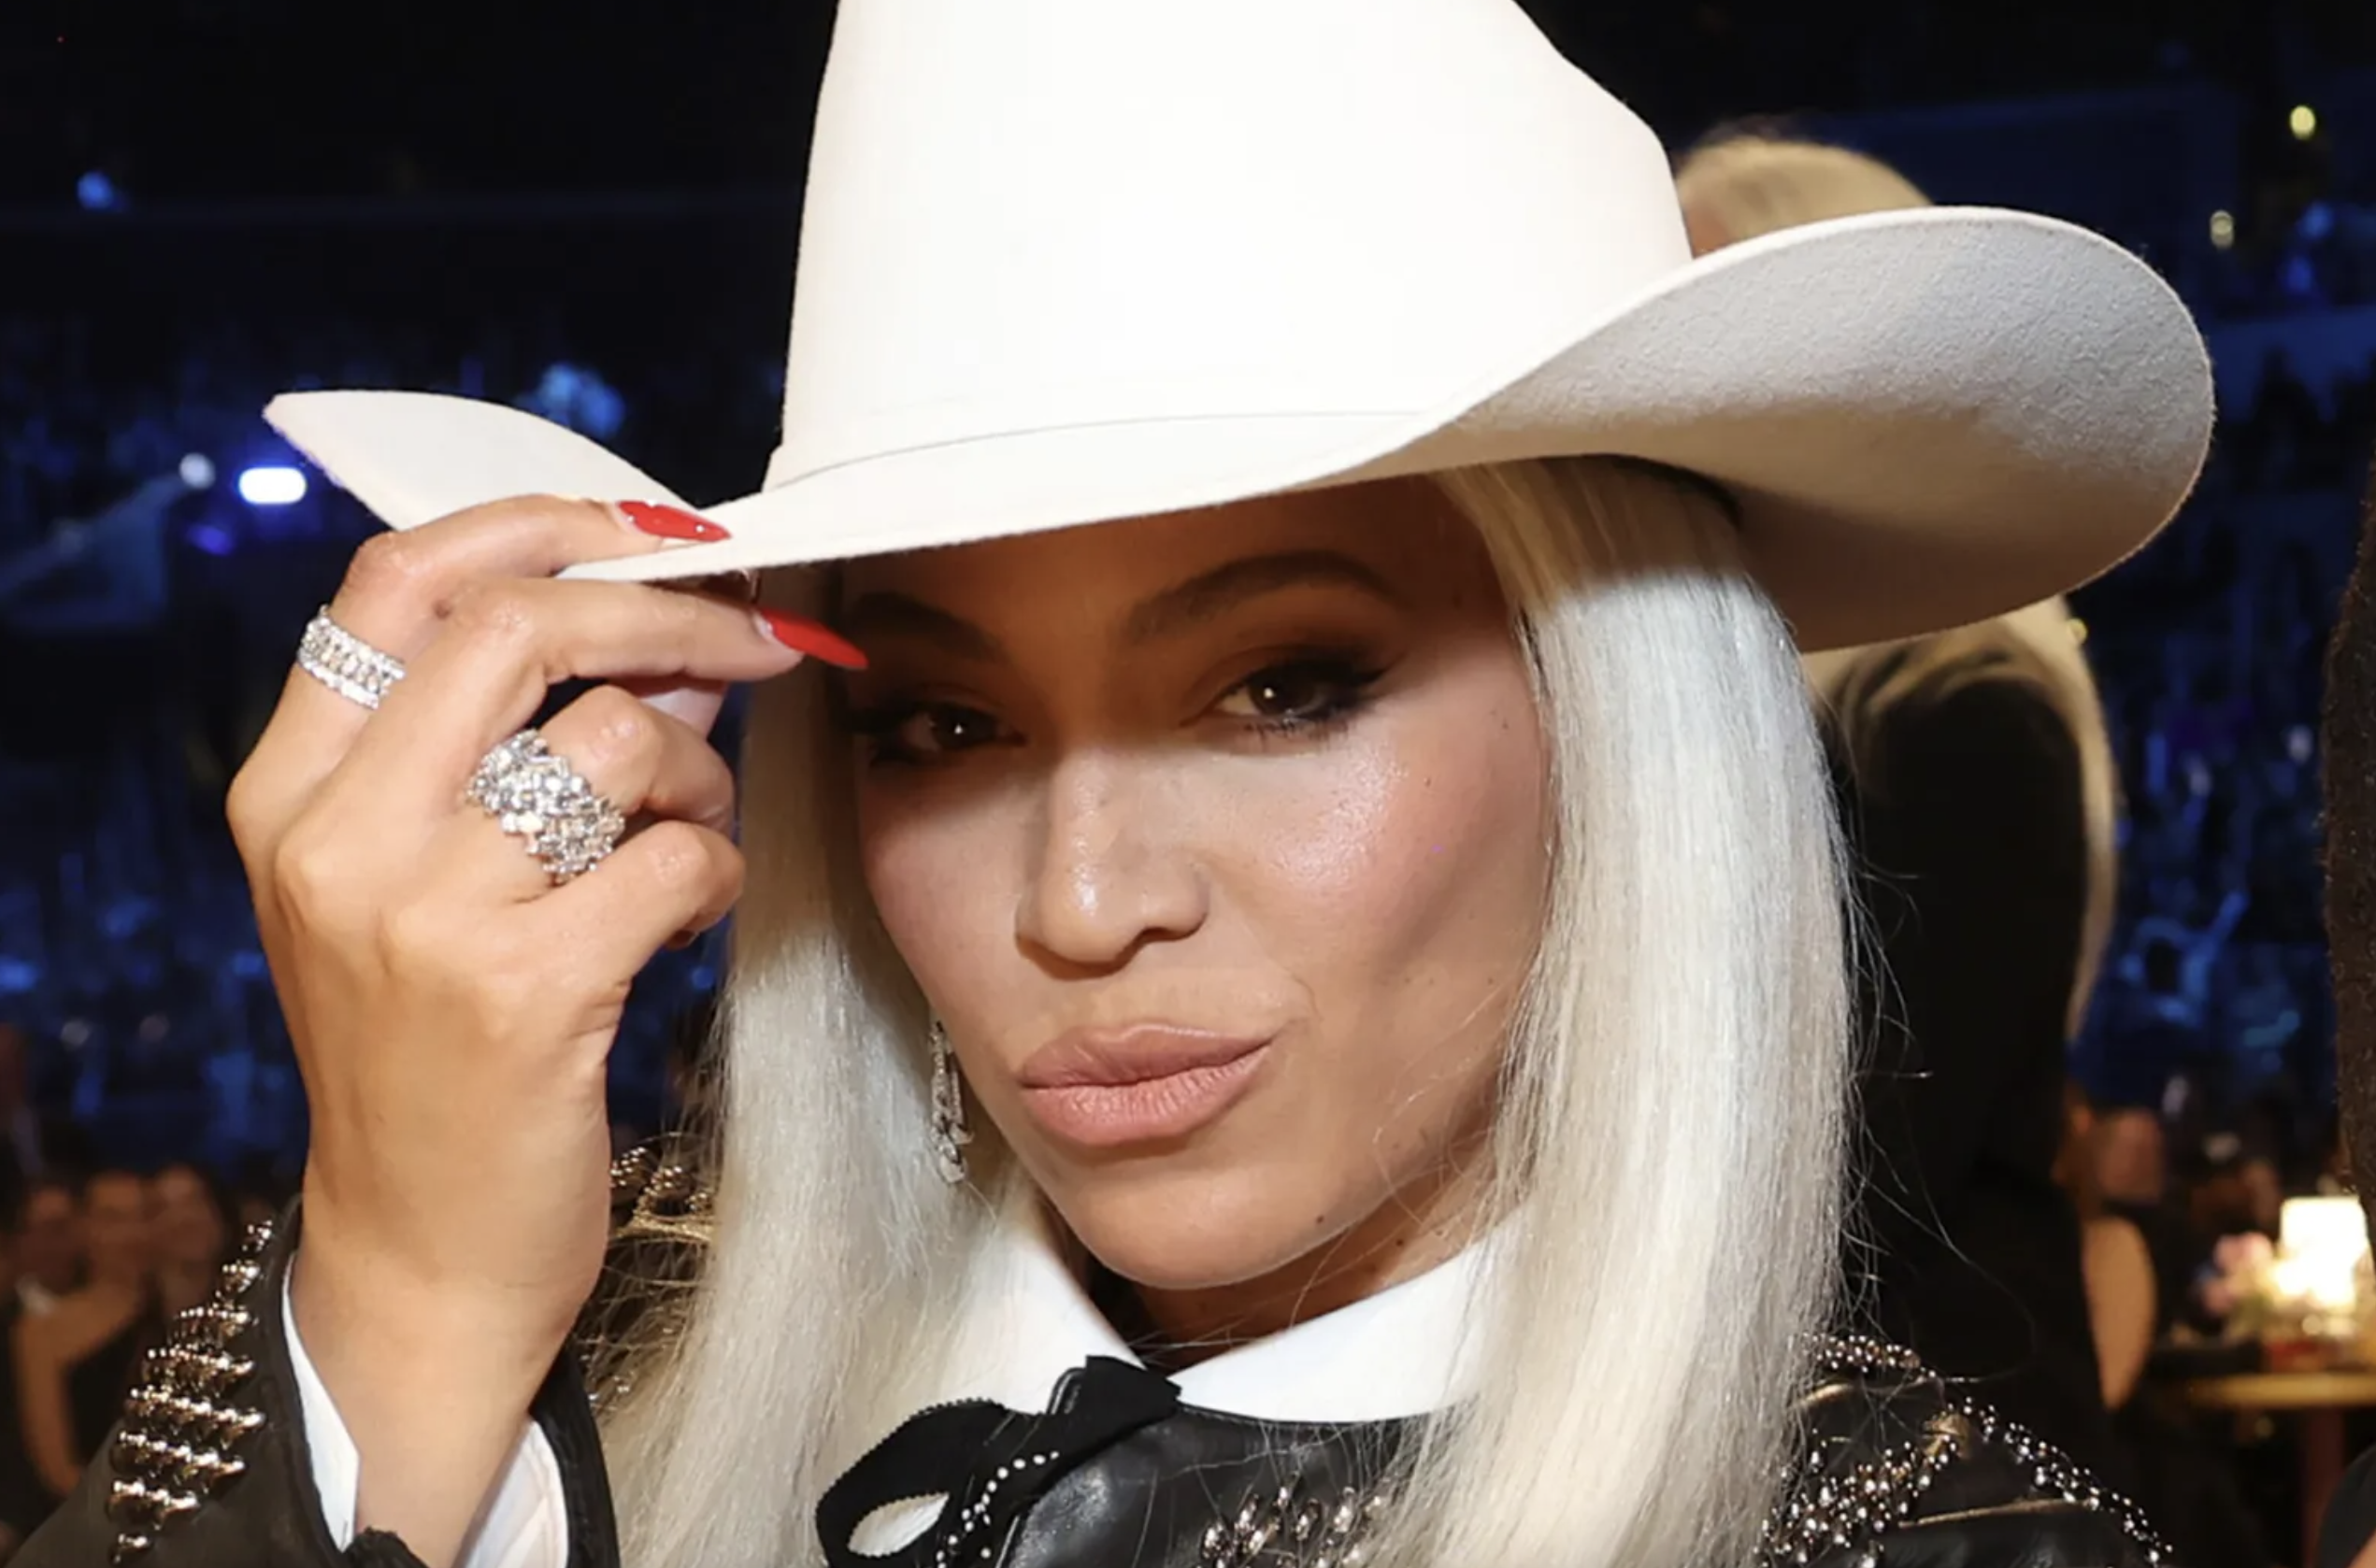 Beyoncé Speaks Out on Country Music Backlash: Unveils ‘Cowboy Carter’ Album Cover with Patriotic Message.